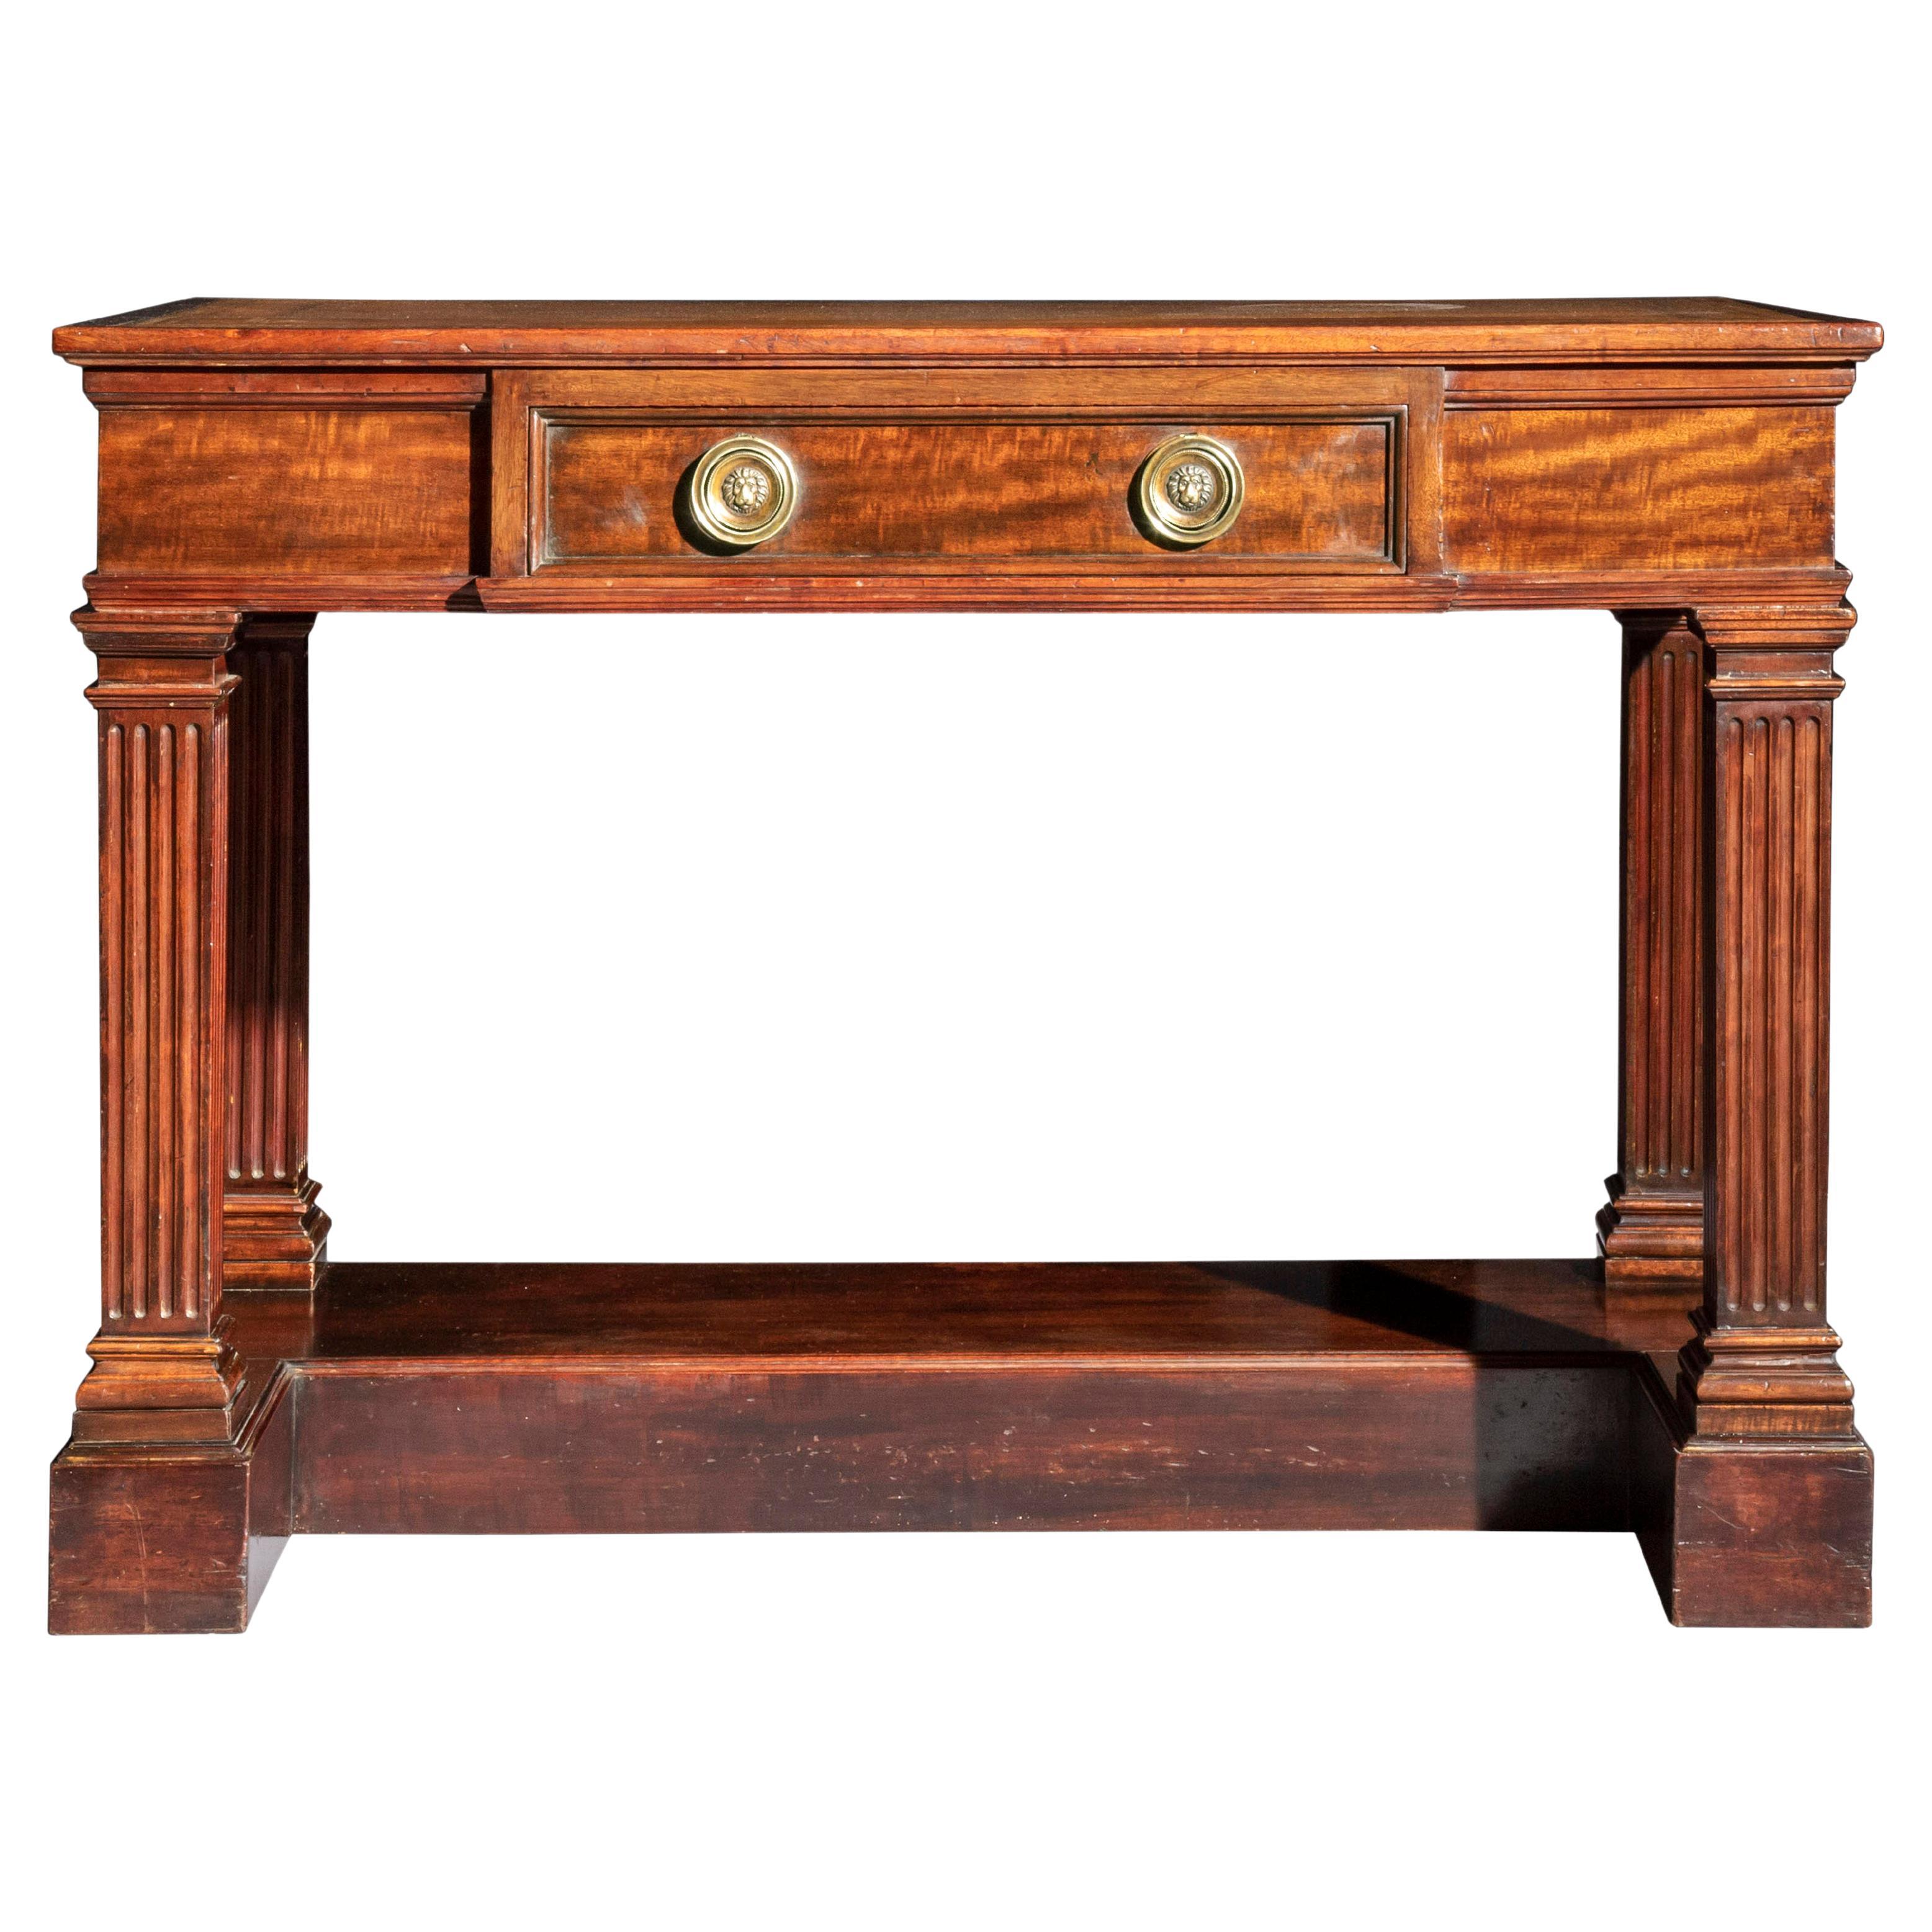 Antique Regency Side Table or Writing Table of Architectural Form, circa 1840